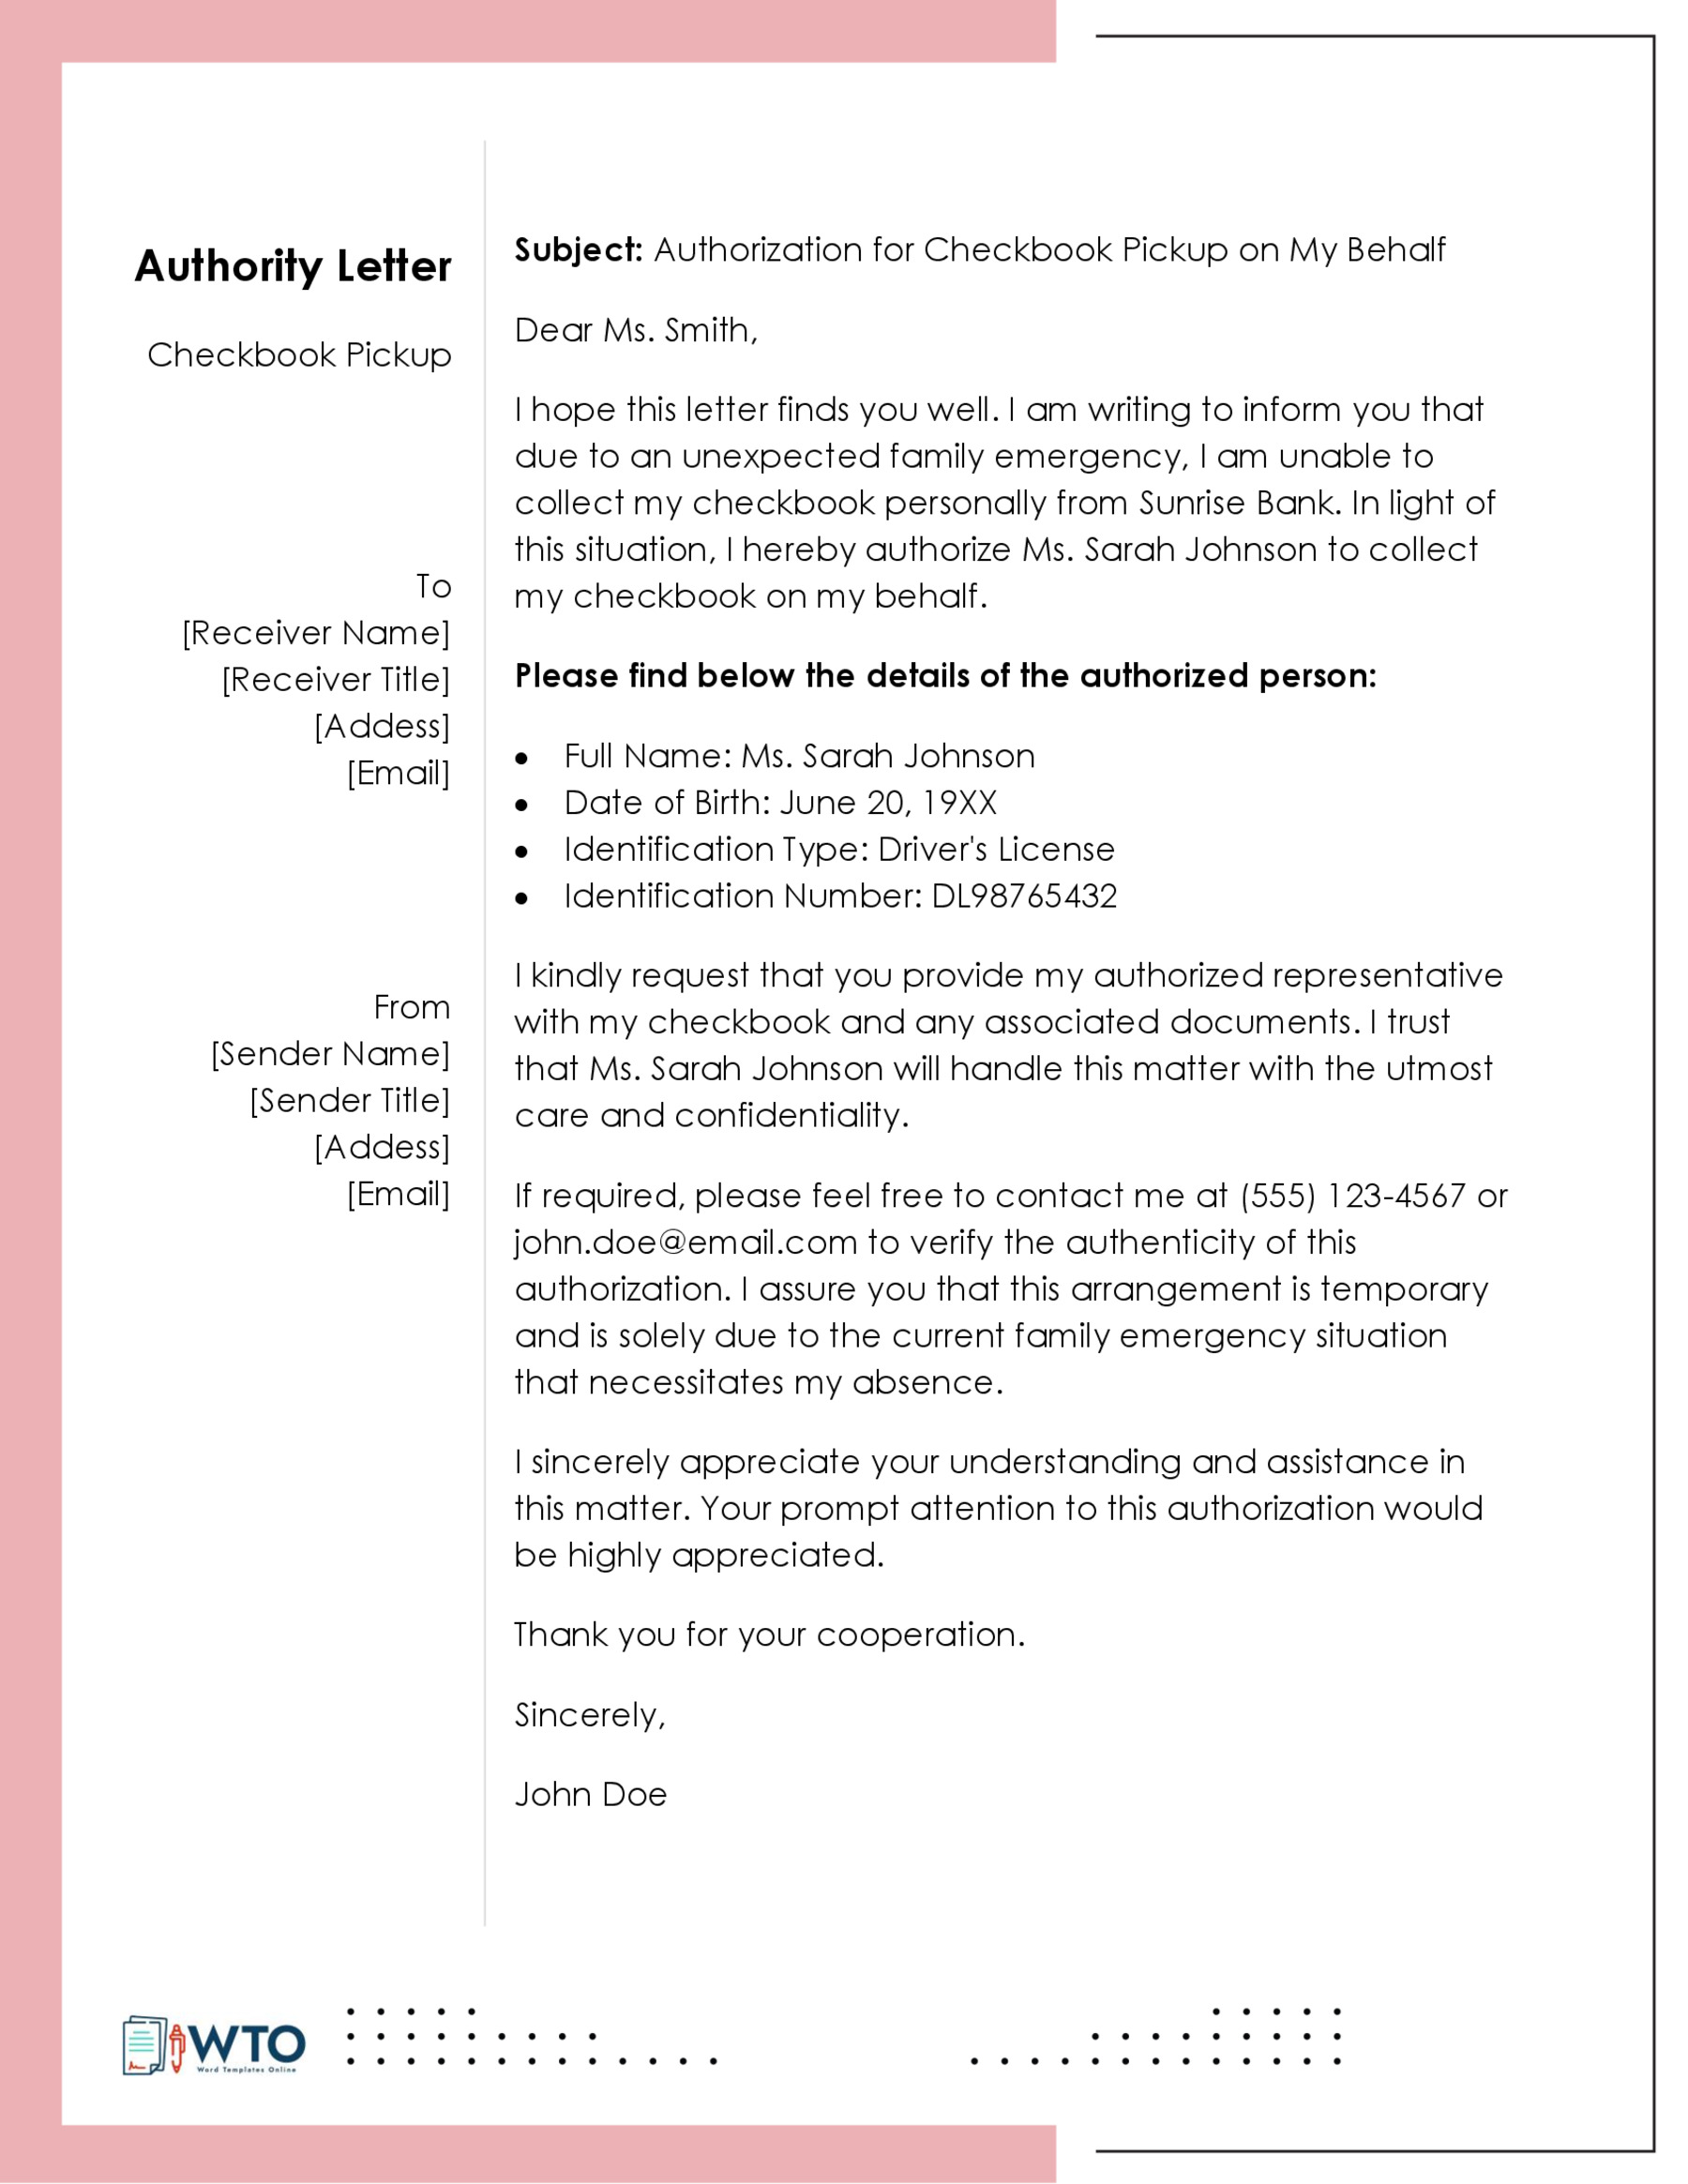 Sample Writing an Authorization Letter for Checkbook Pickup-Ms word Format